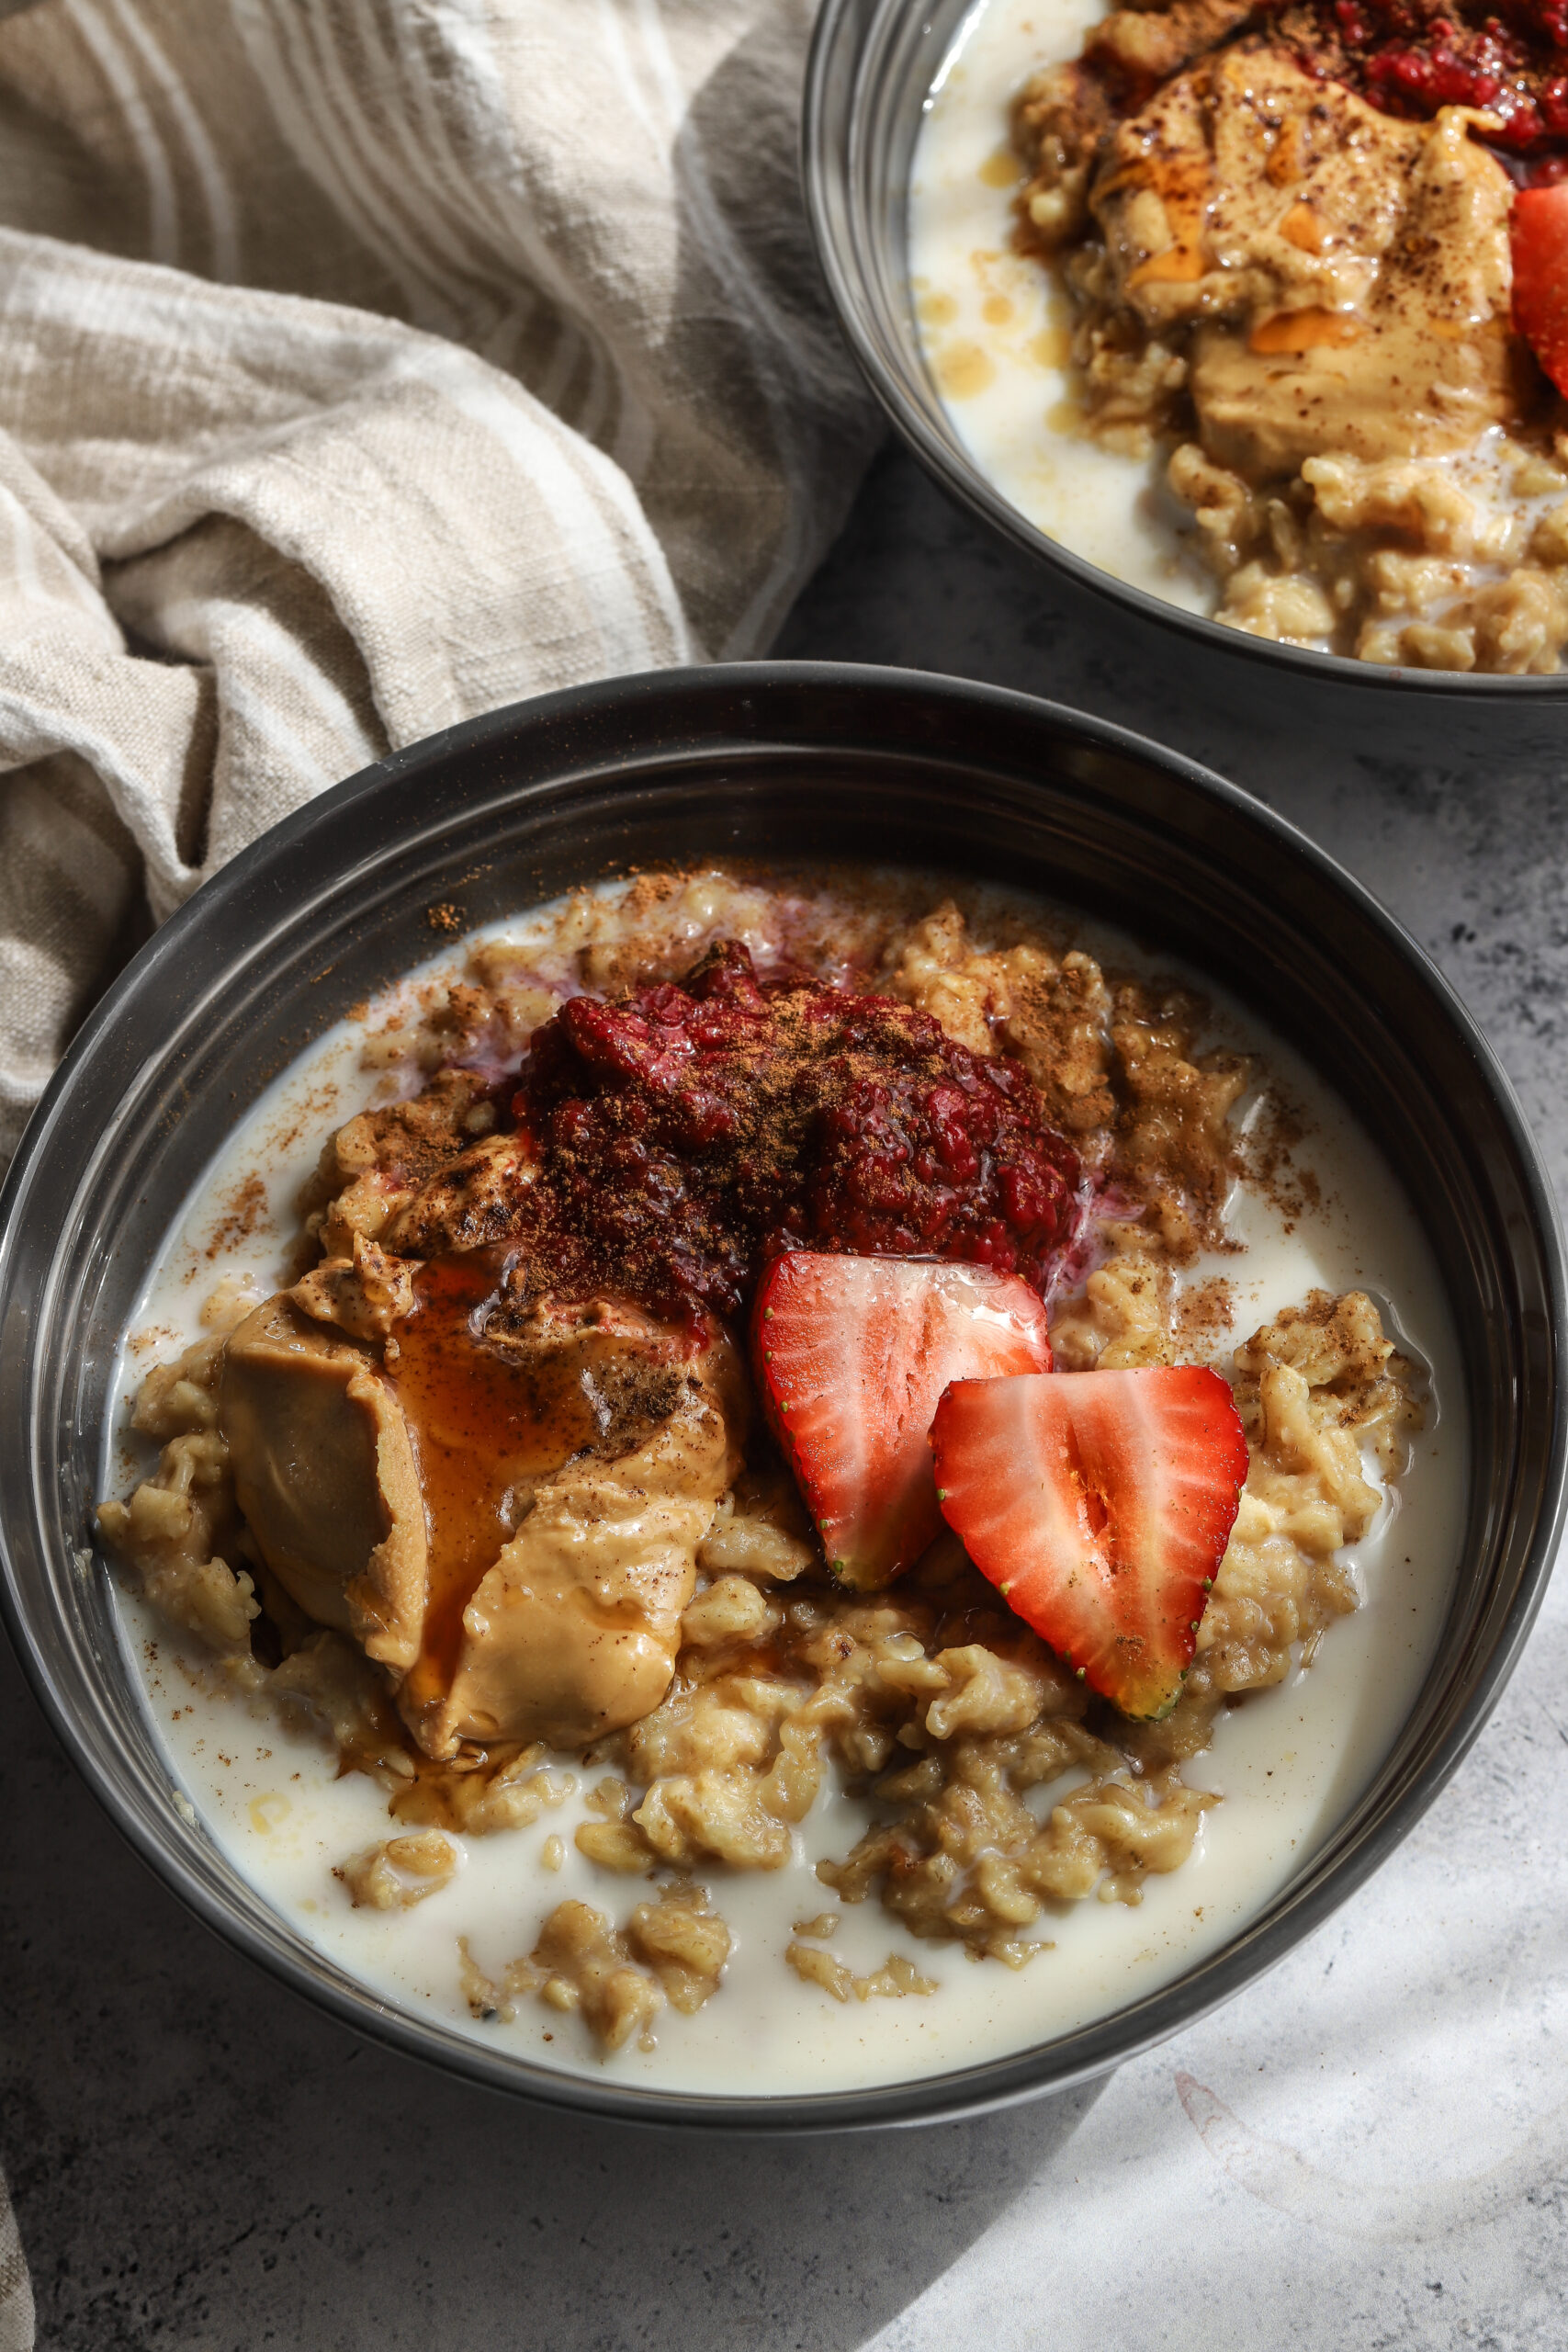 PB and Jelly oatmeal